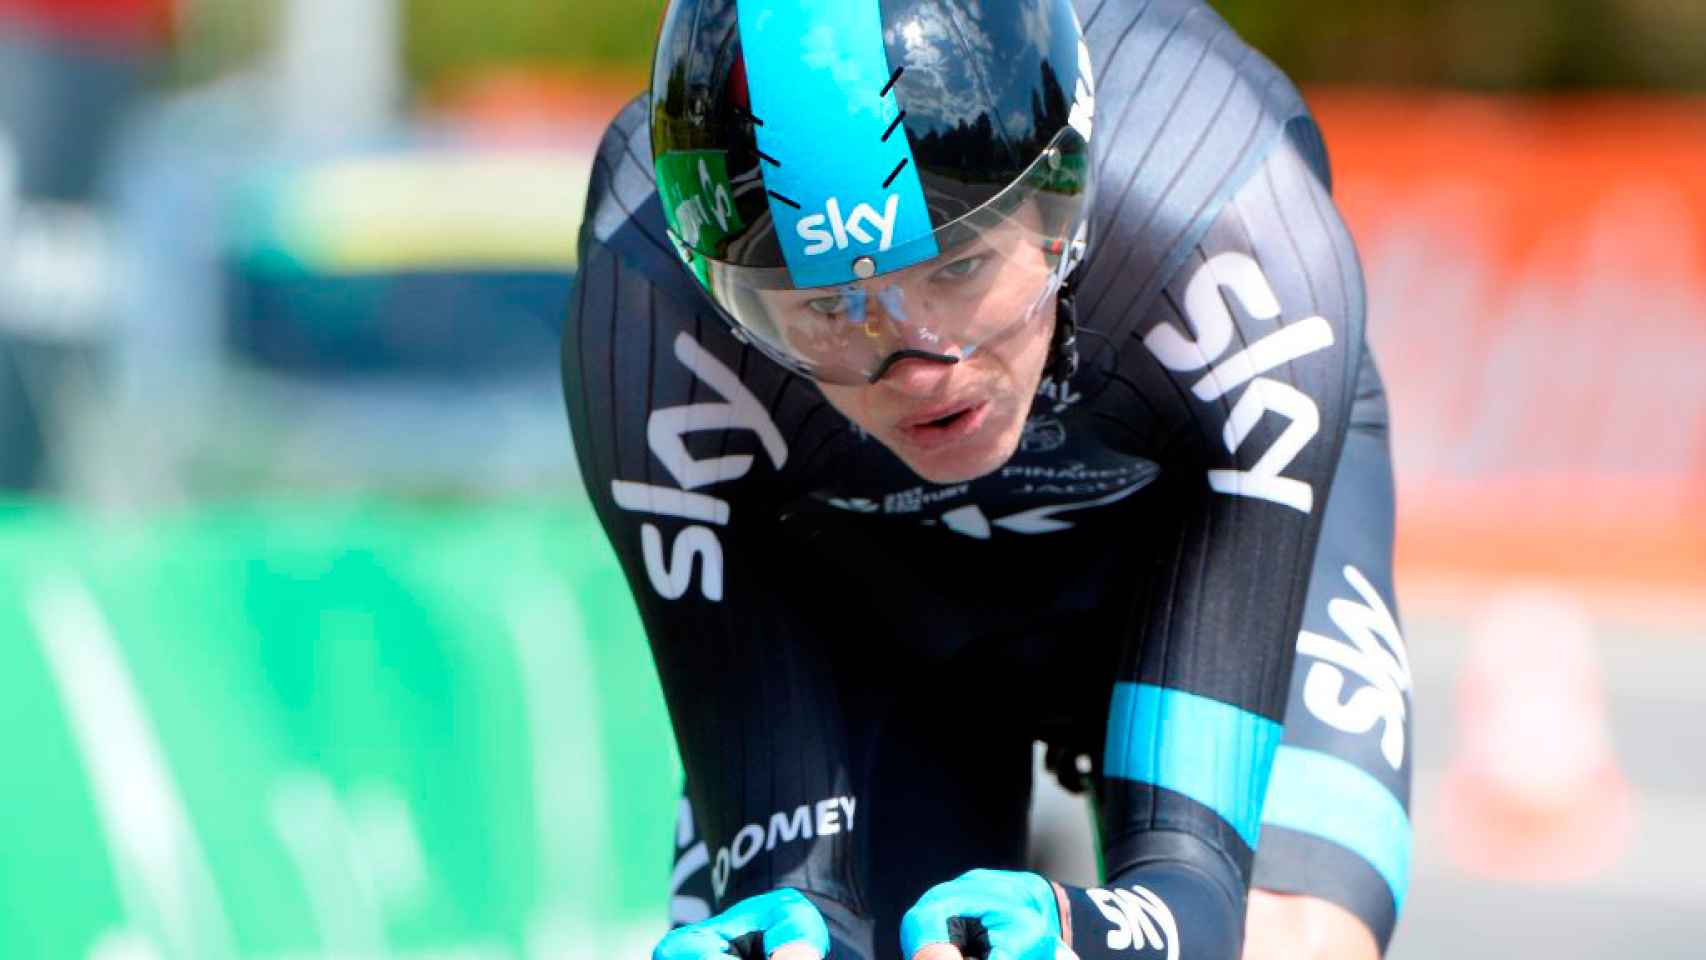 froome-sky